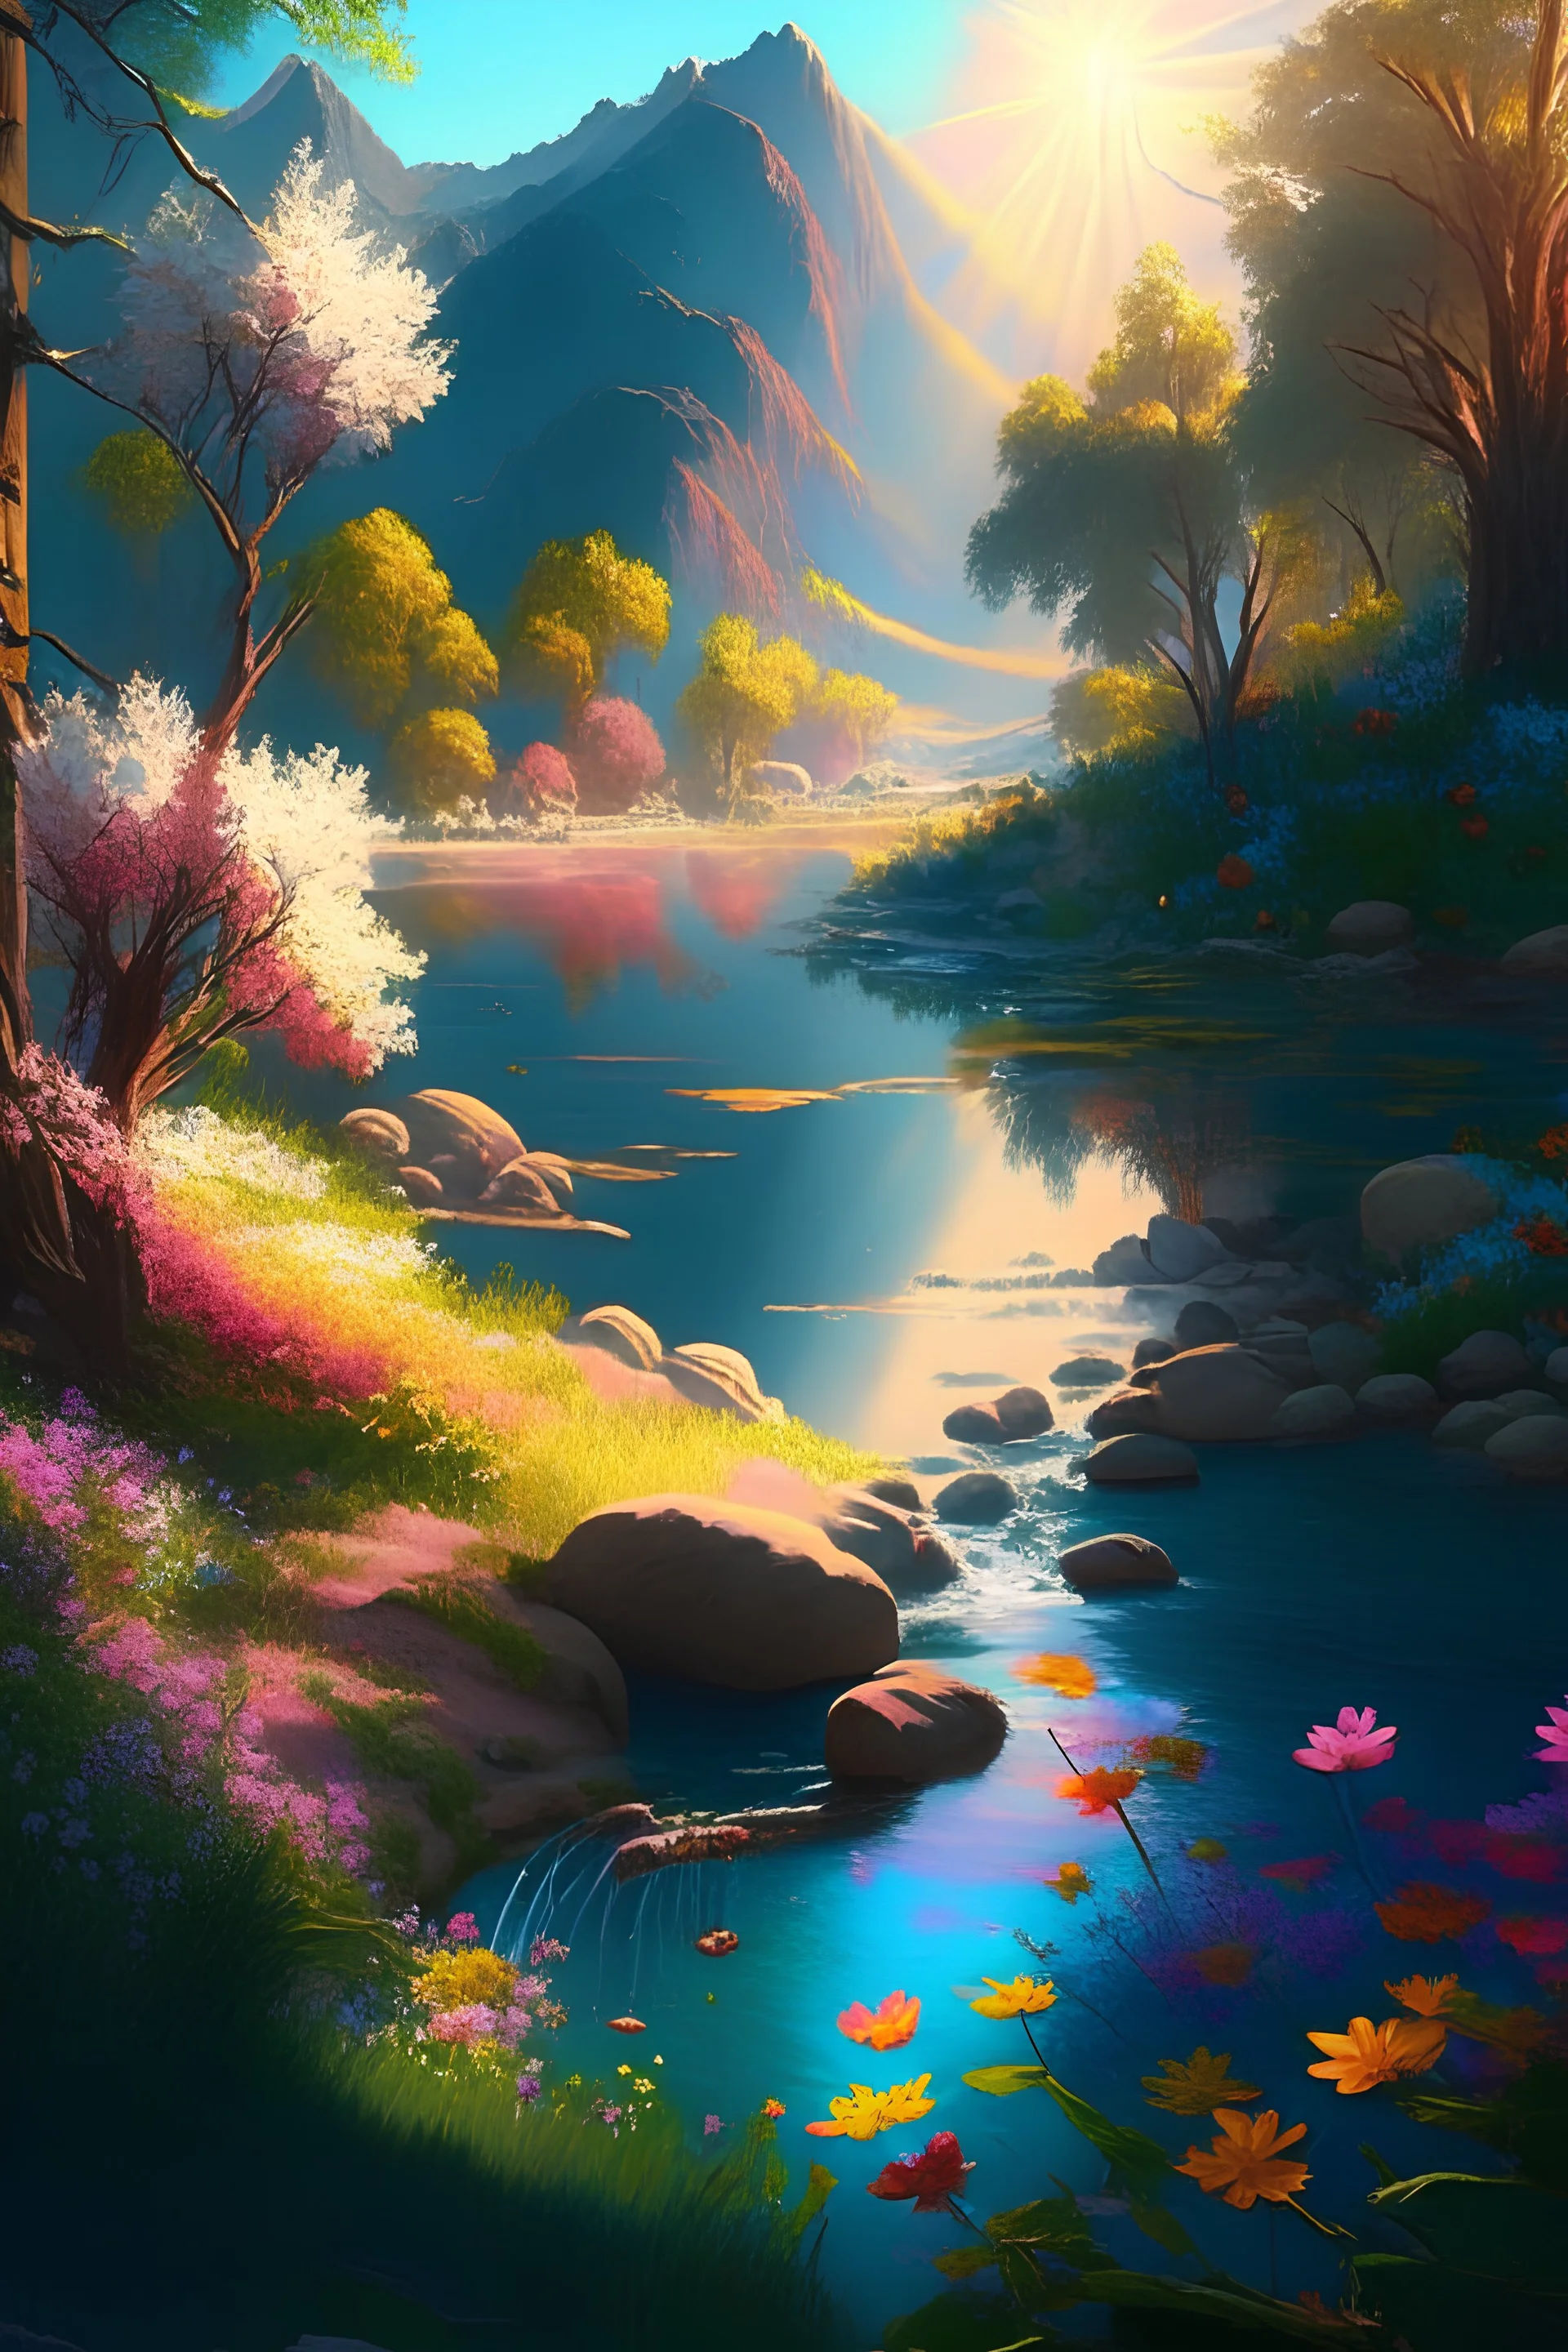 full light,highlight, trees, river, day, sun day, an idyliic forest with bright colorful flowers, mountains, sun,flower, a small river, paradise